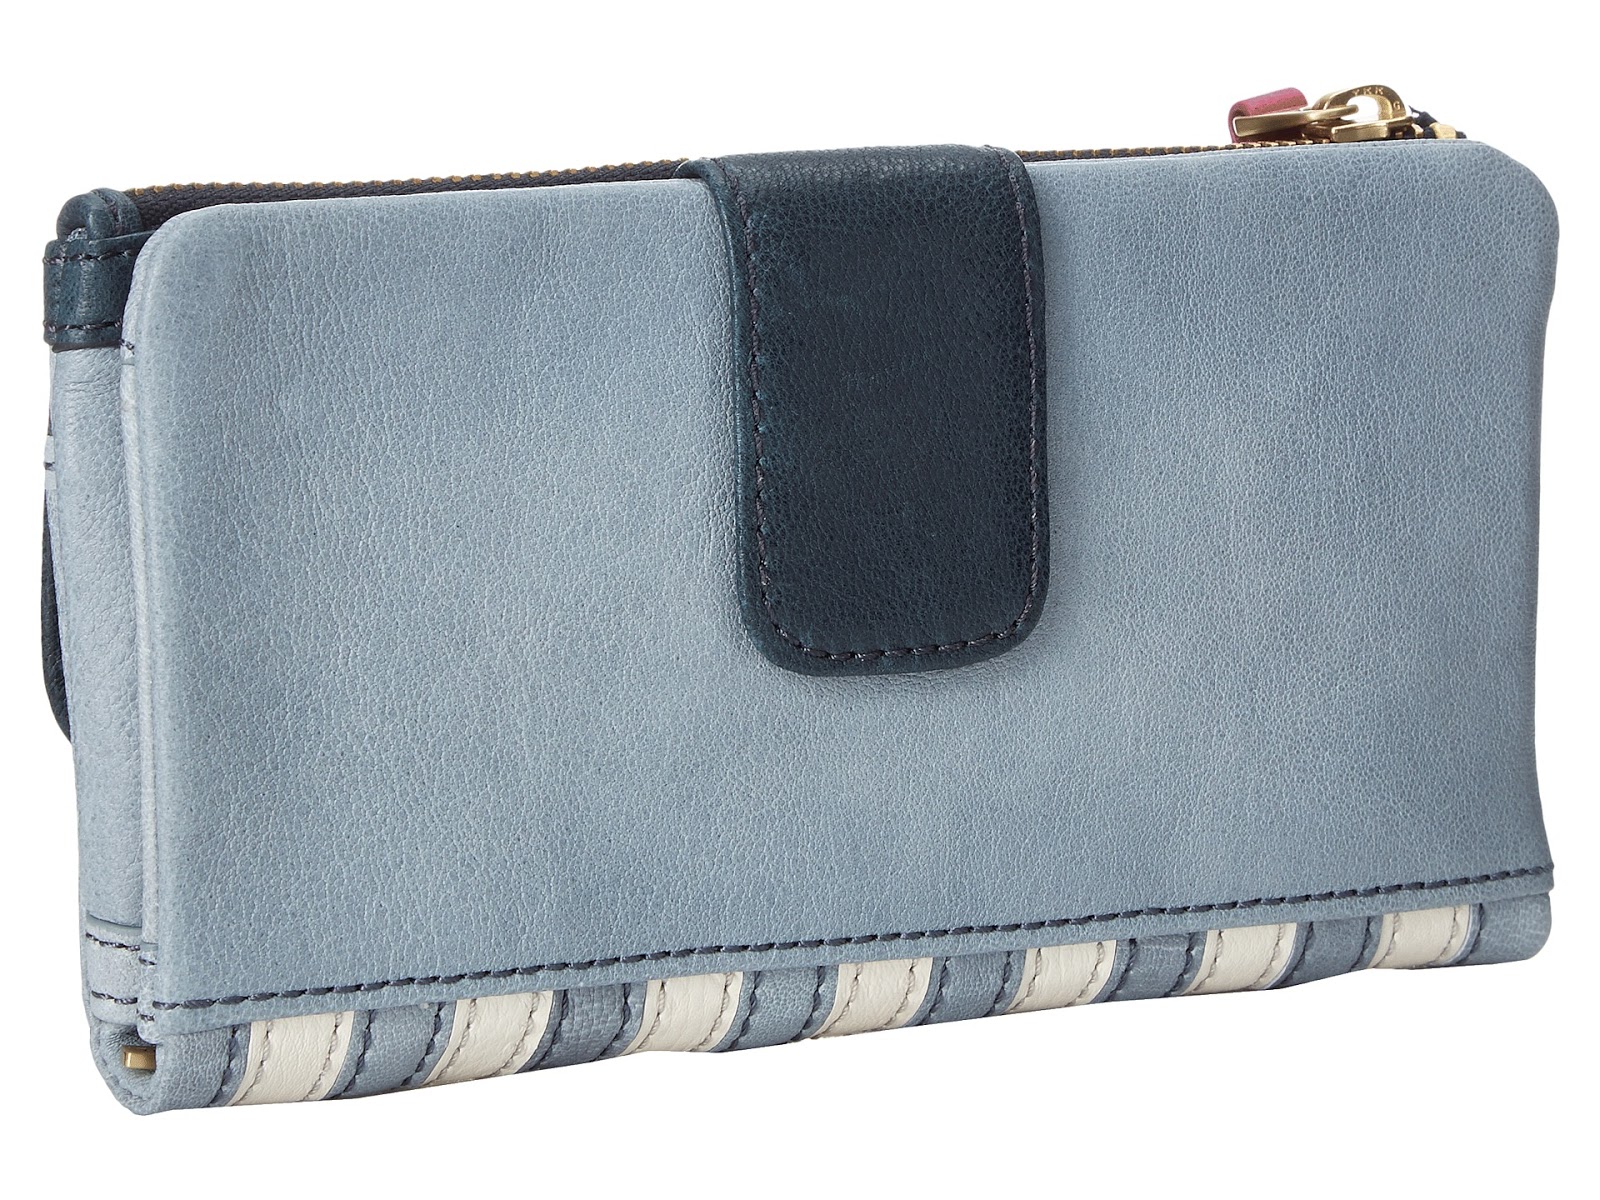 Fossil Emory Clutch Wallet | IQS Executive